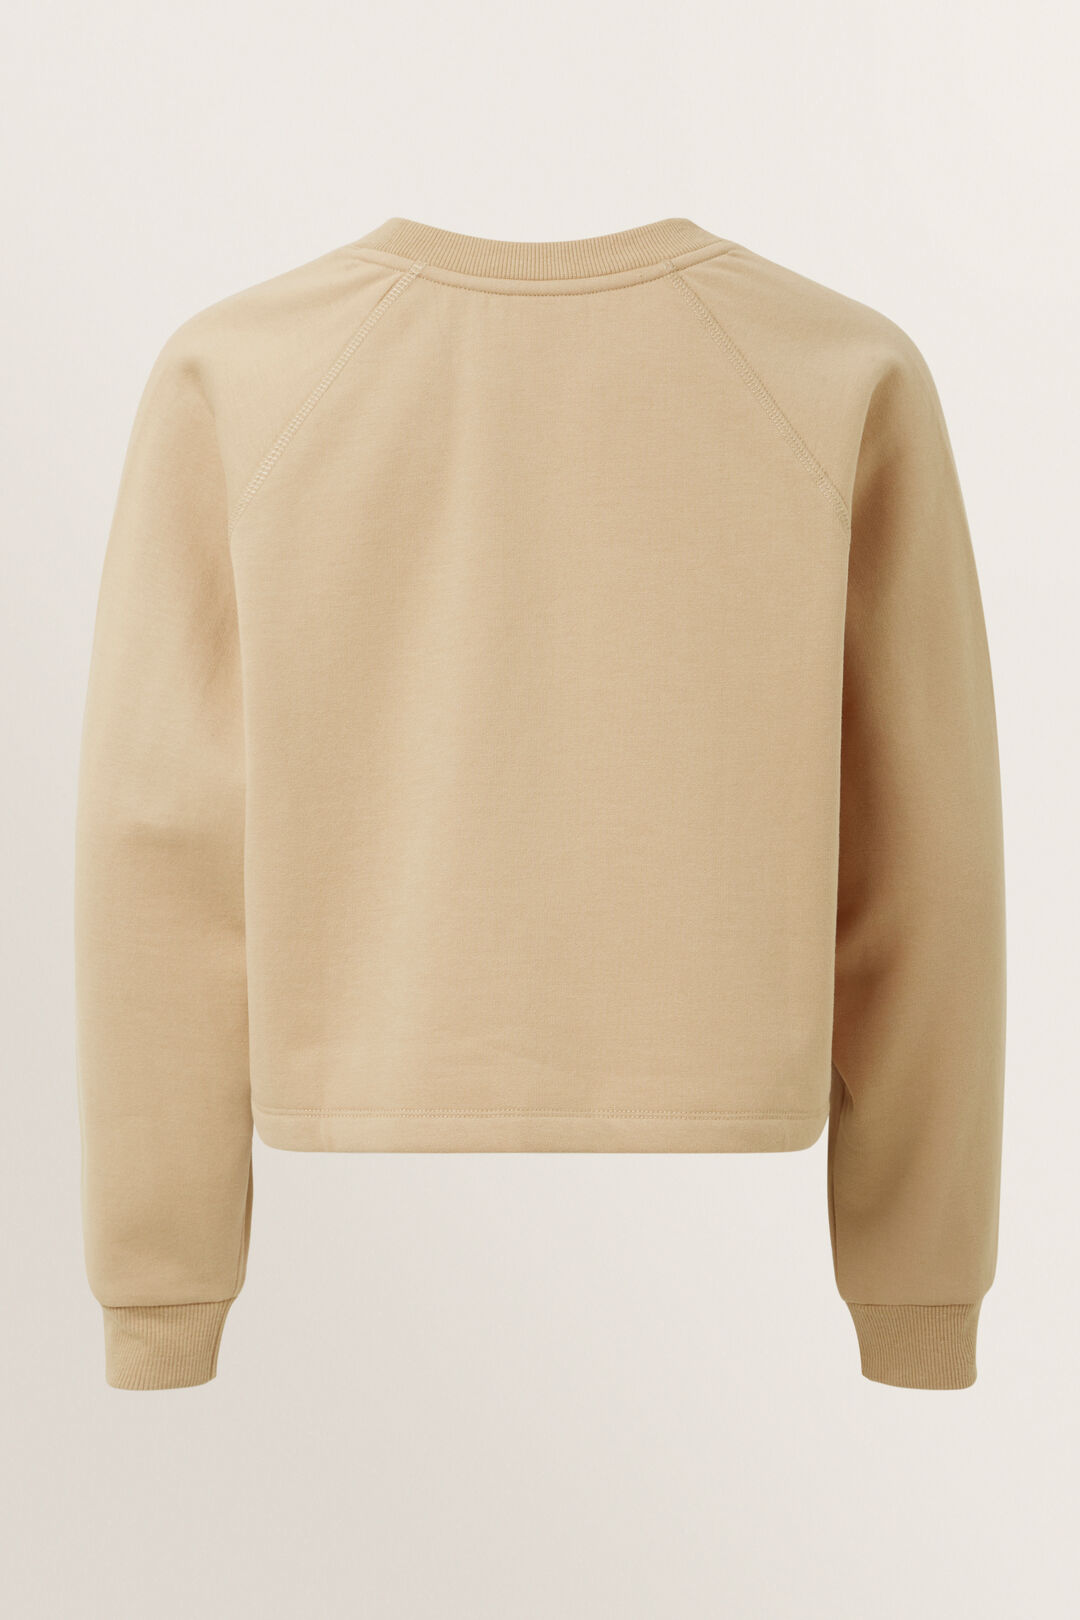 Cropped Sweater  Cappuccino  hi-res